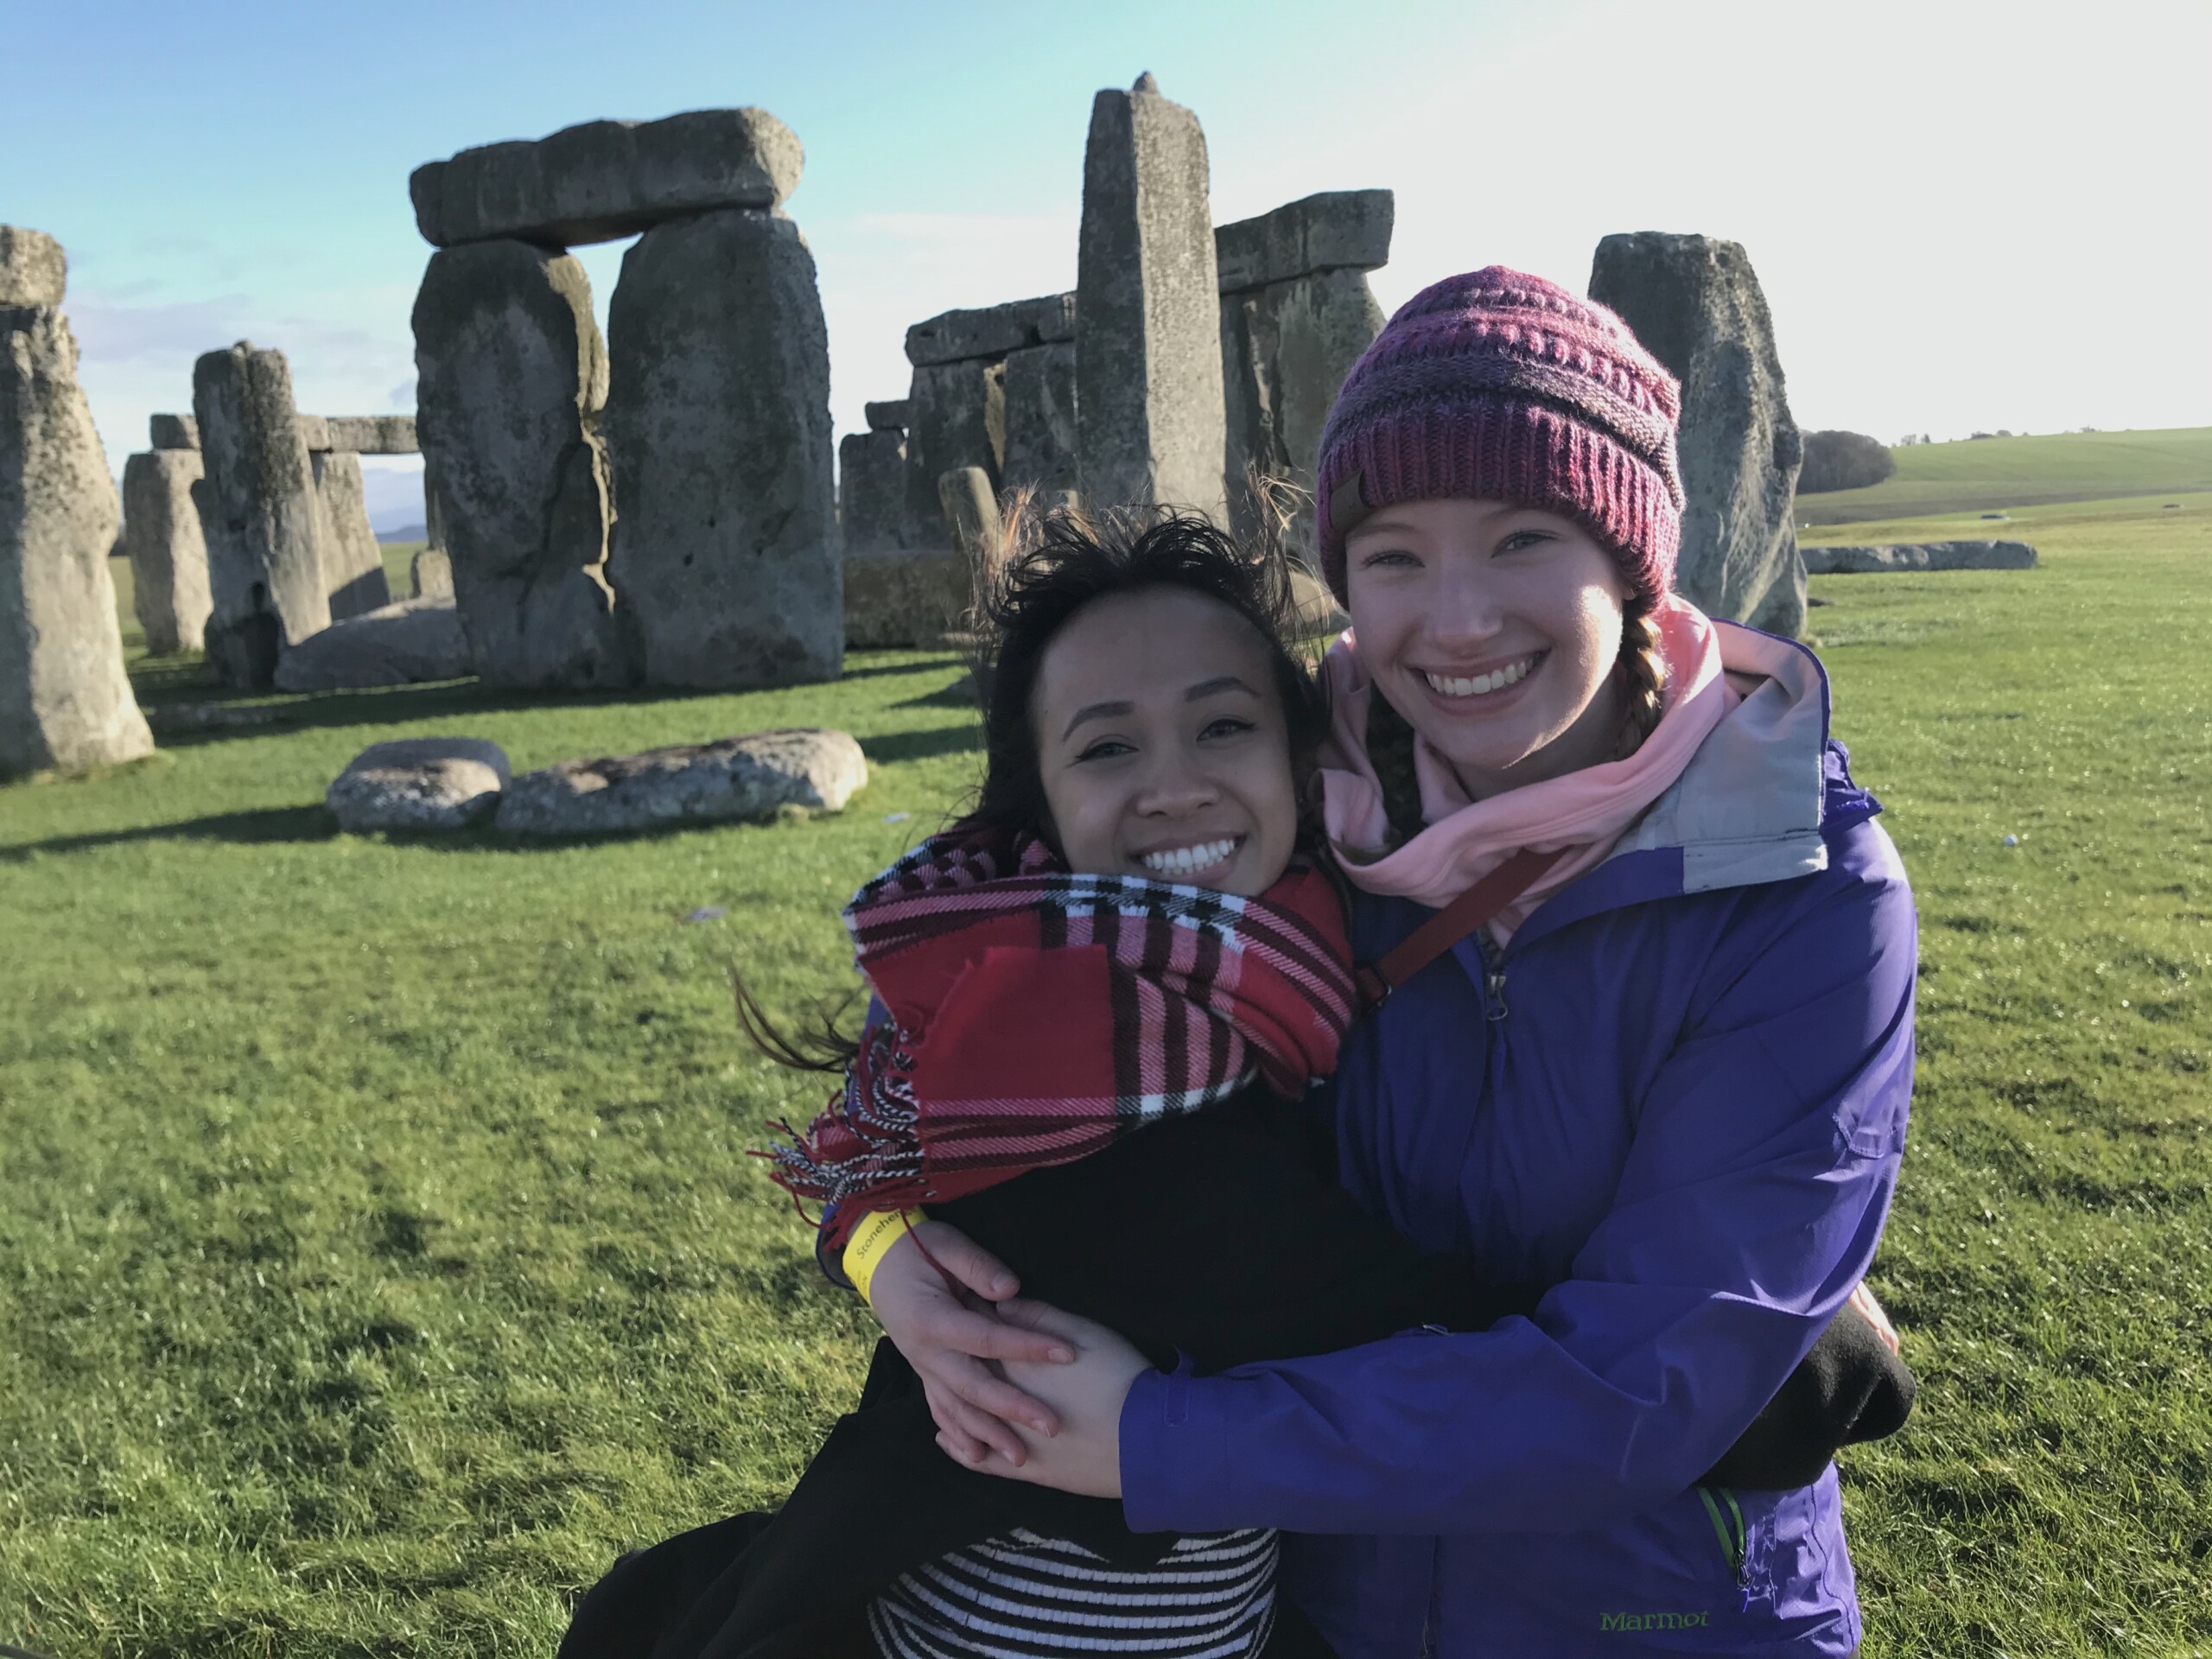 Students smile for a photo in front of Stonehenge in England.